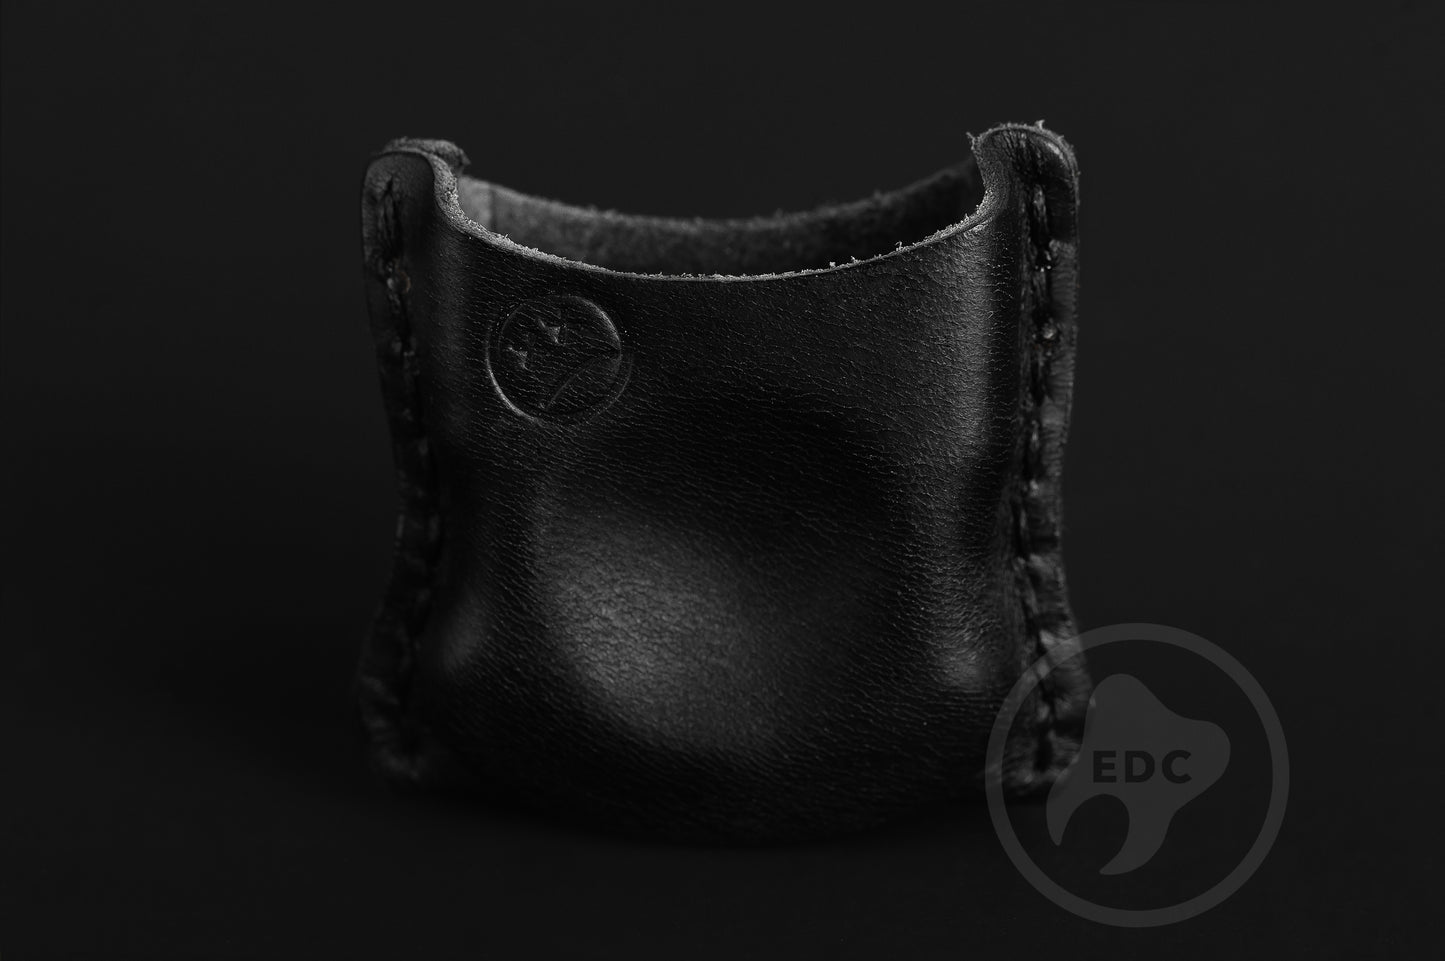 EDC Pouch Black Leather for Knuck SFK 01